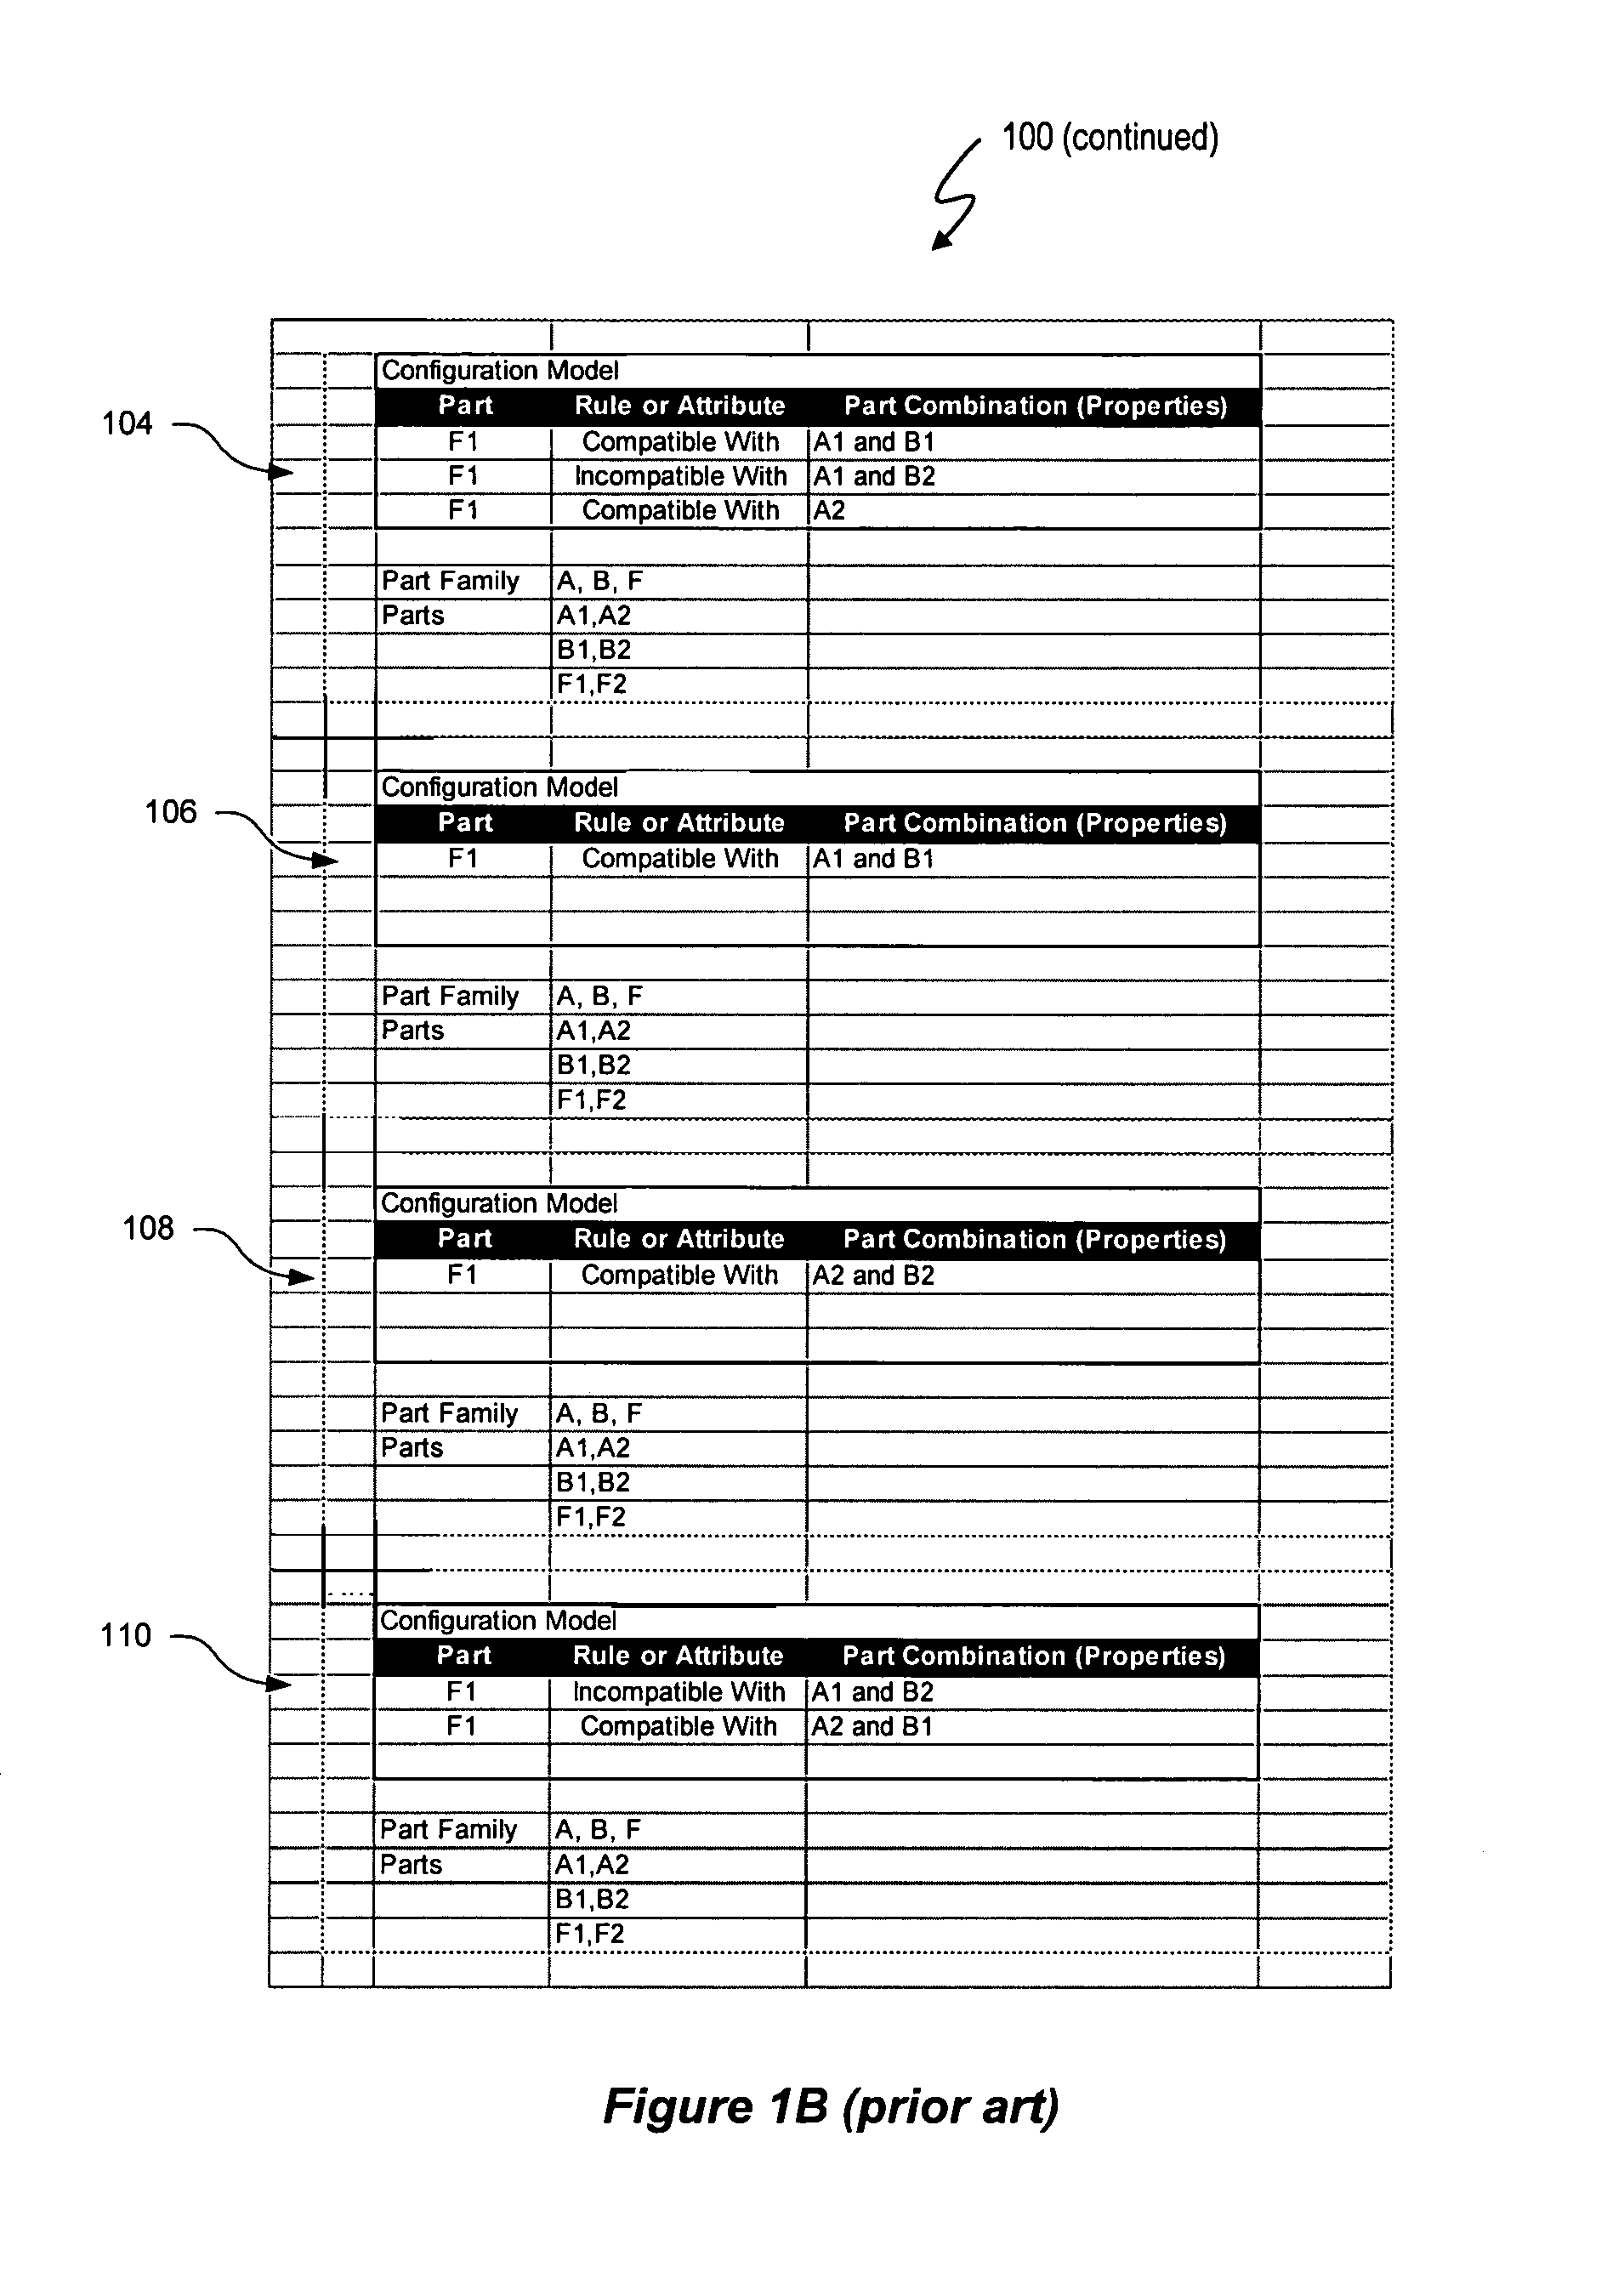 Variable domain resource data security for data processing systems